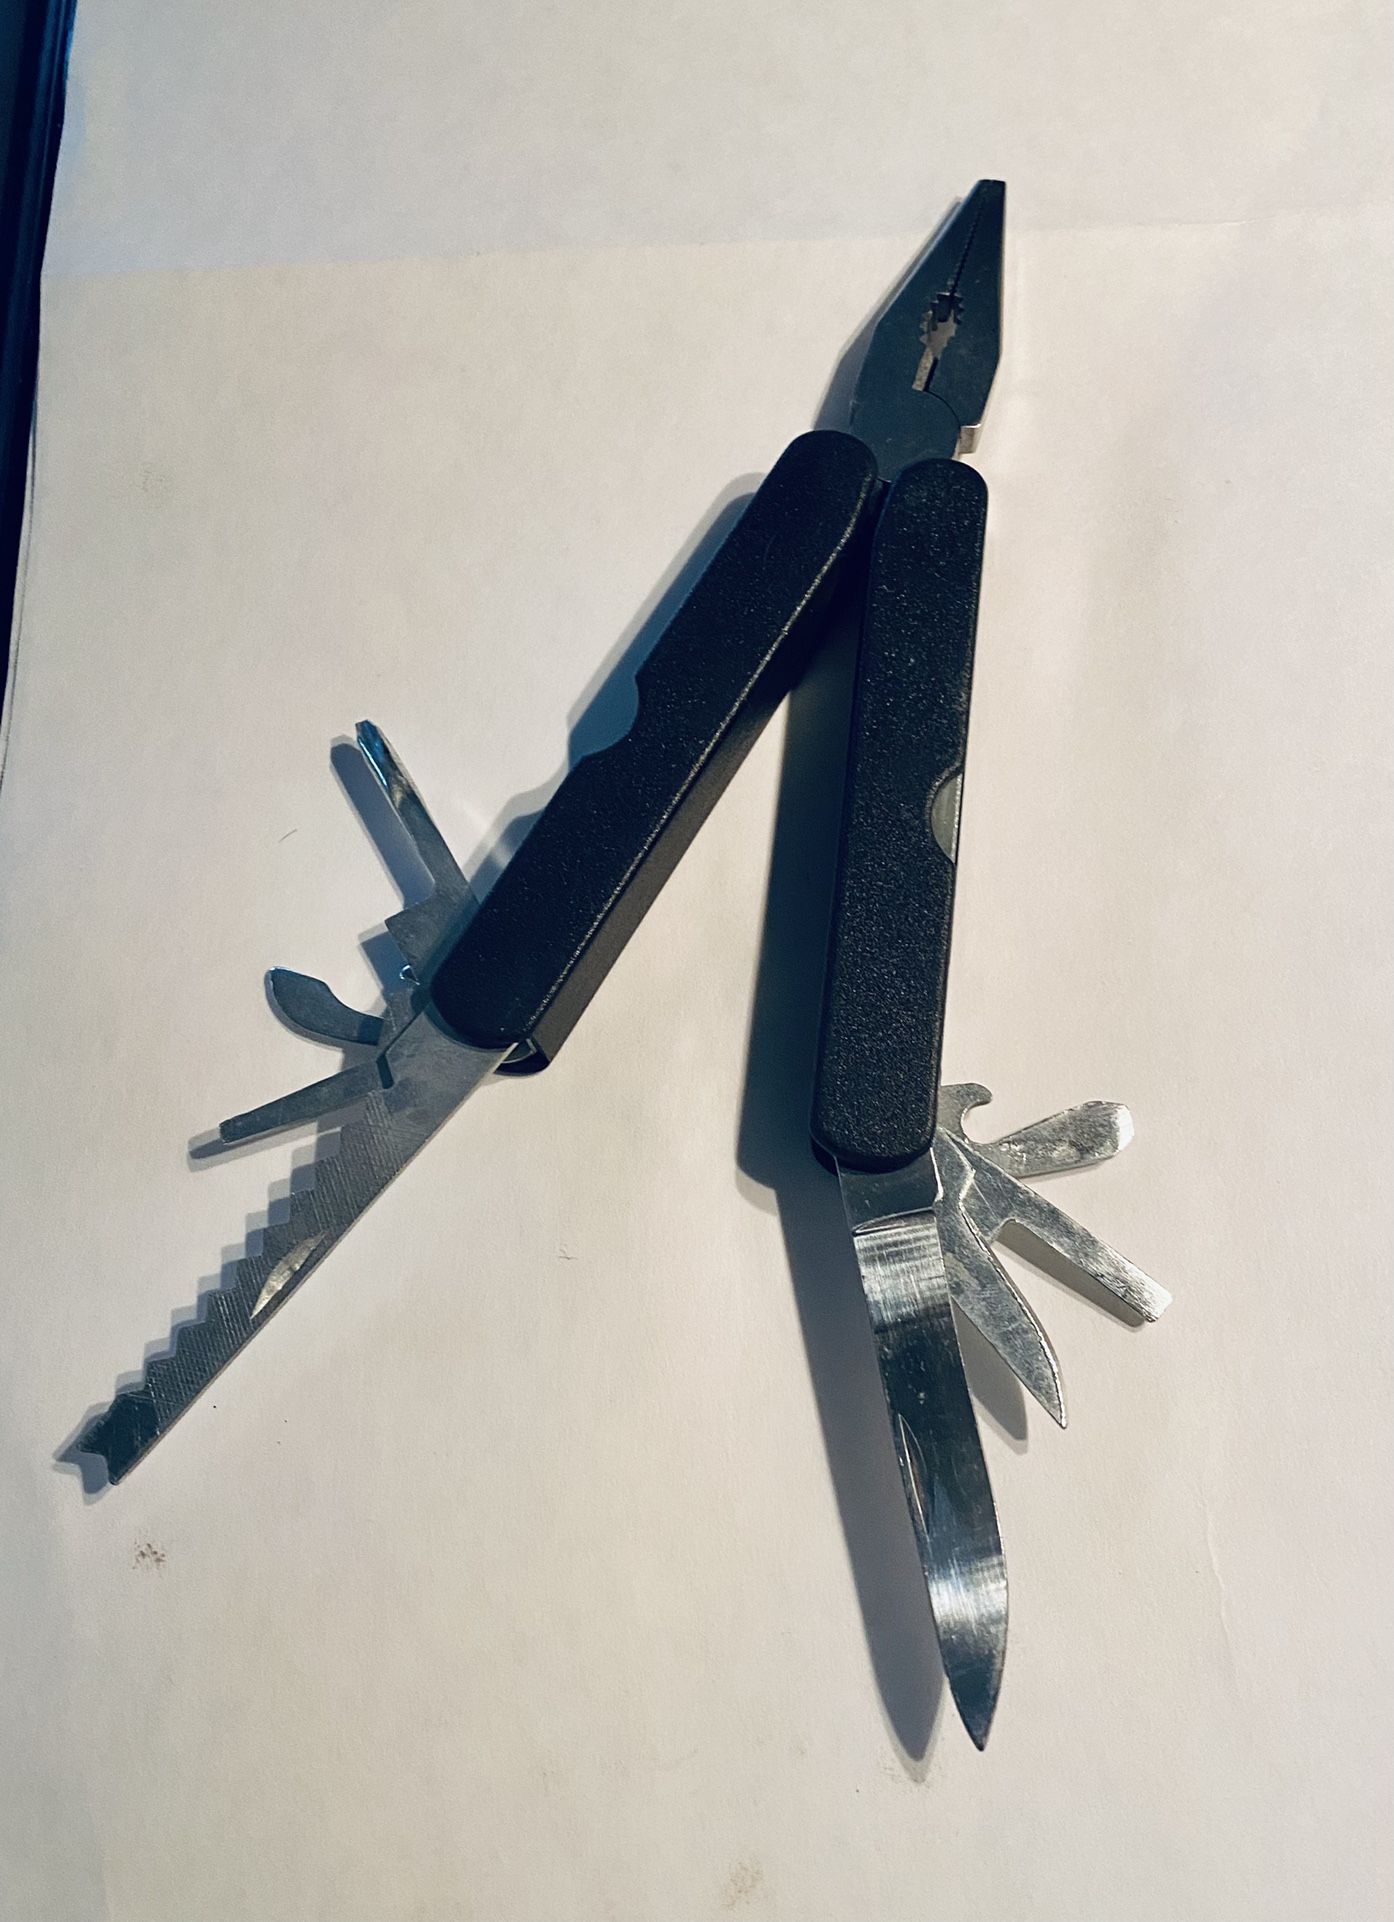 Sturdy Multi-tool Pocket needle nose/regular Pliers! Never be stuck again! For pocket, glove box, boat, camper, anywhere.  Case has belt loop. Sturdy 